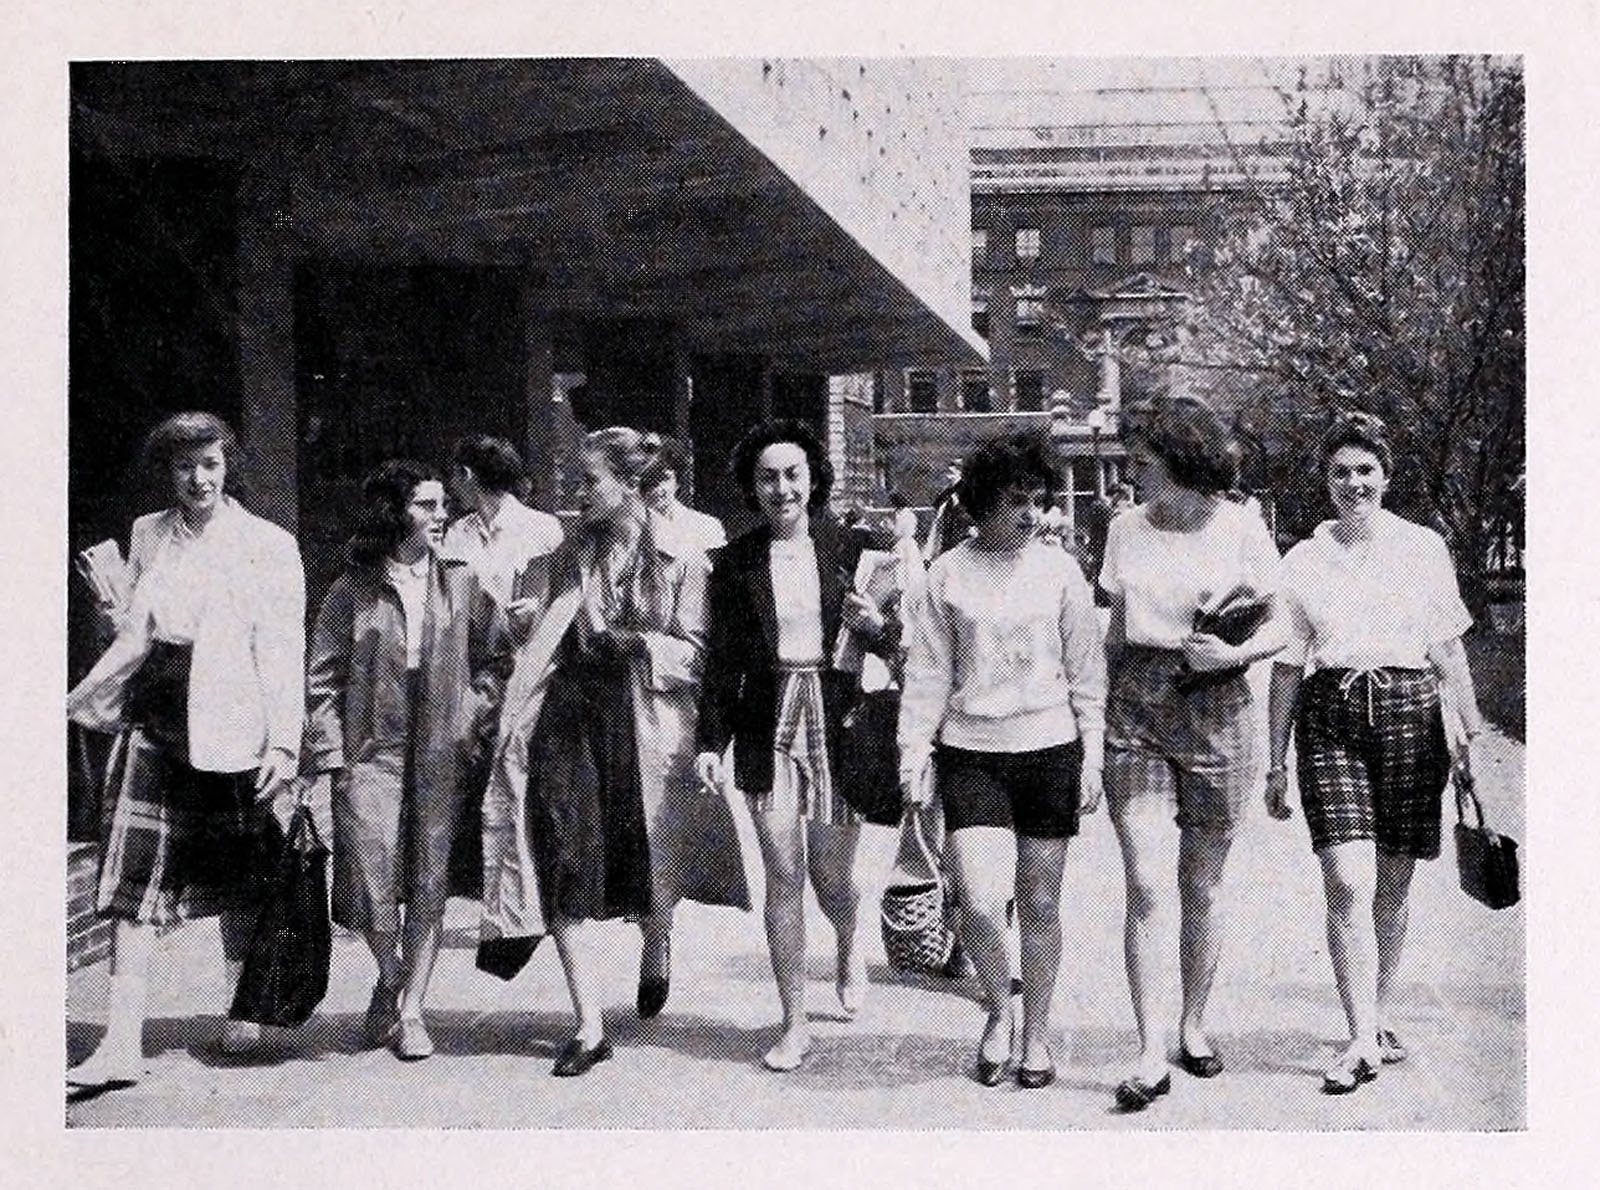 Students on campus 1960